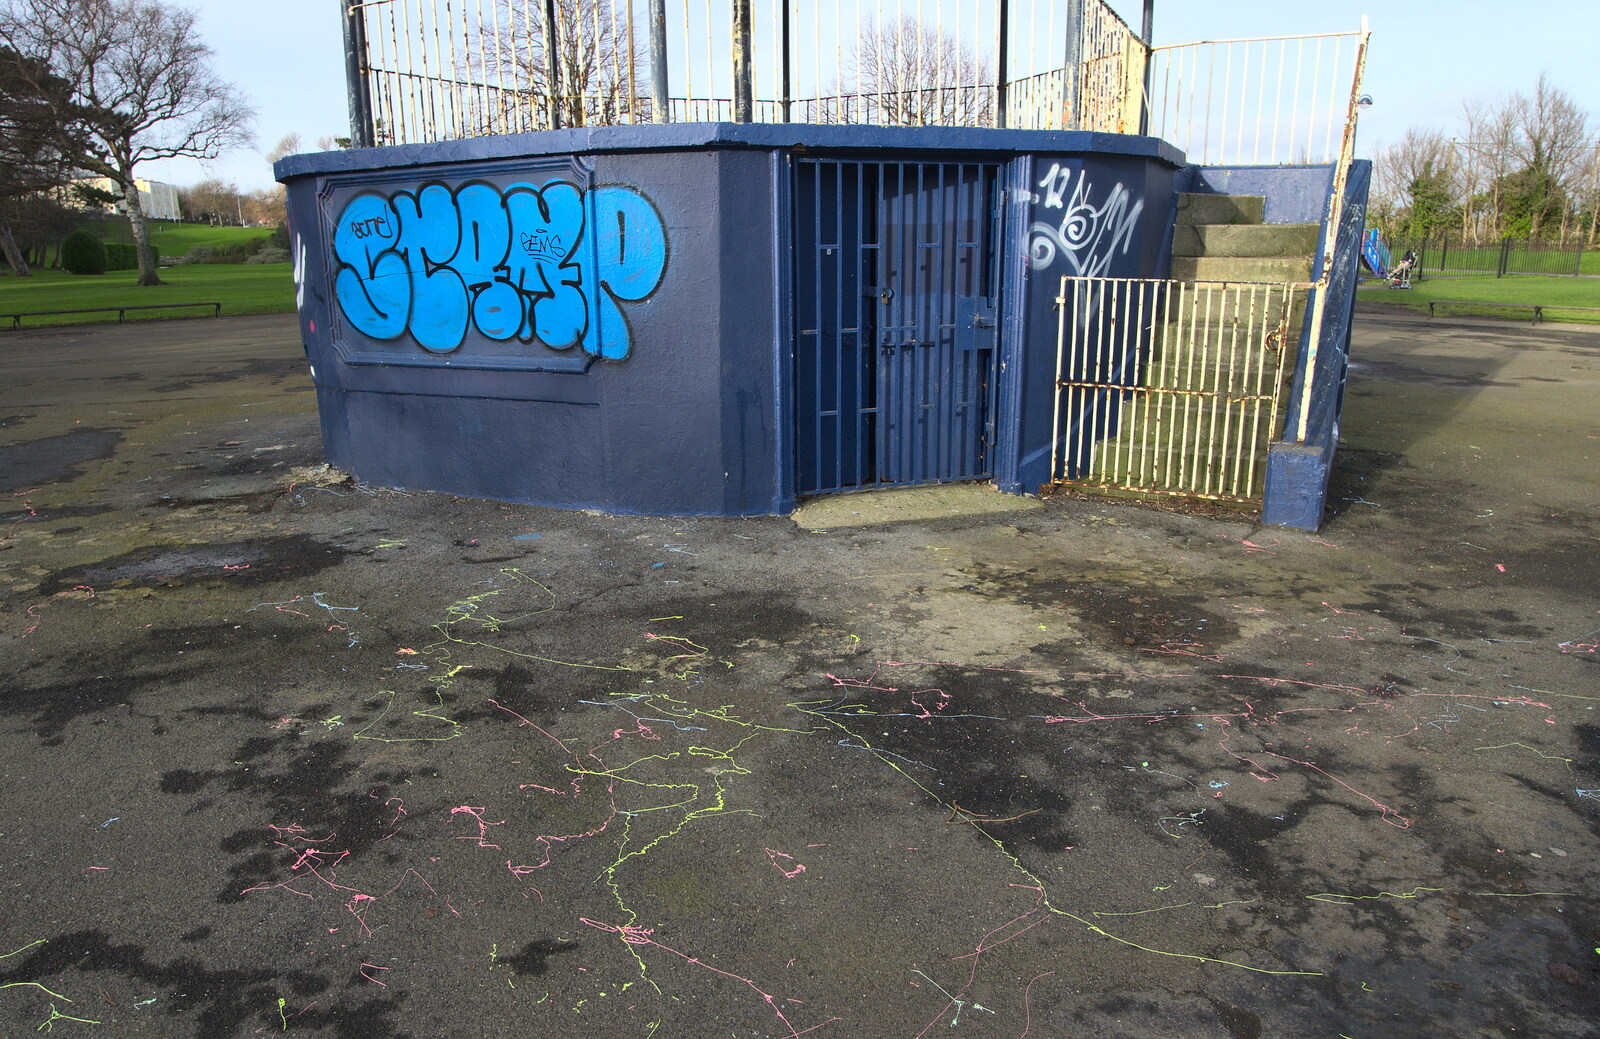 There are splatters of paint all over the ground from A Morning in Blackrock, County Dublin, Ireland - 8th January 2012